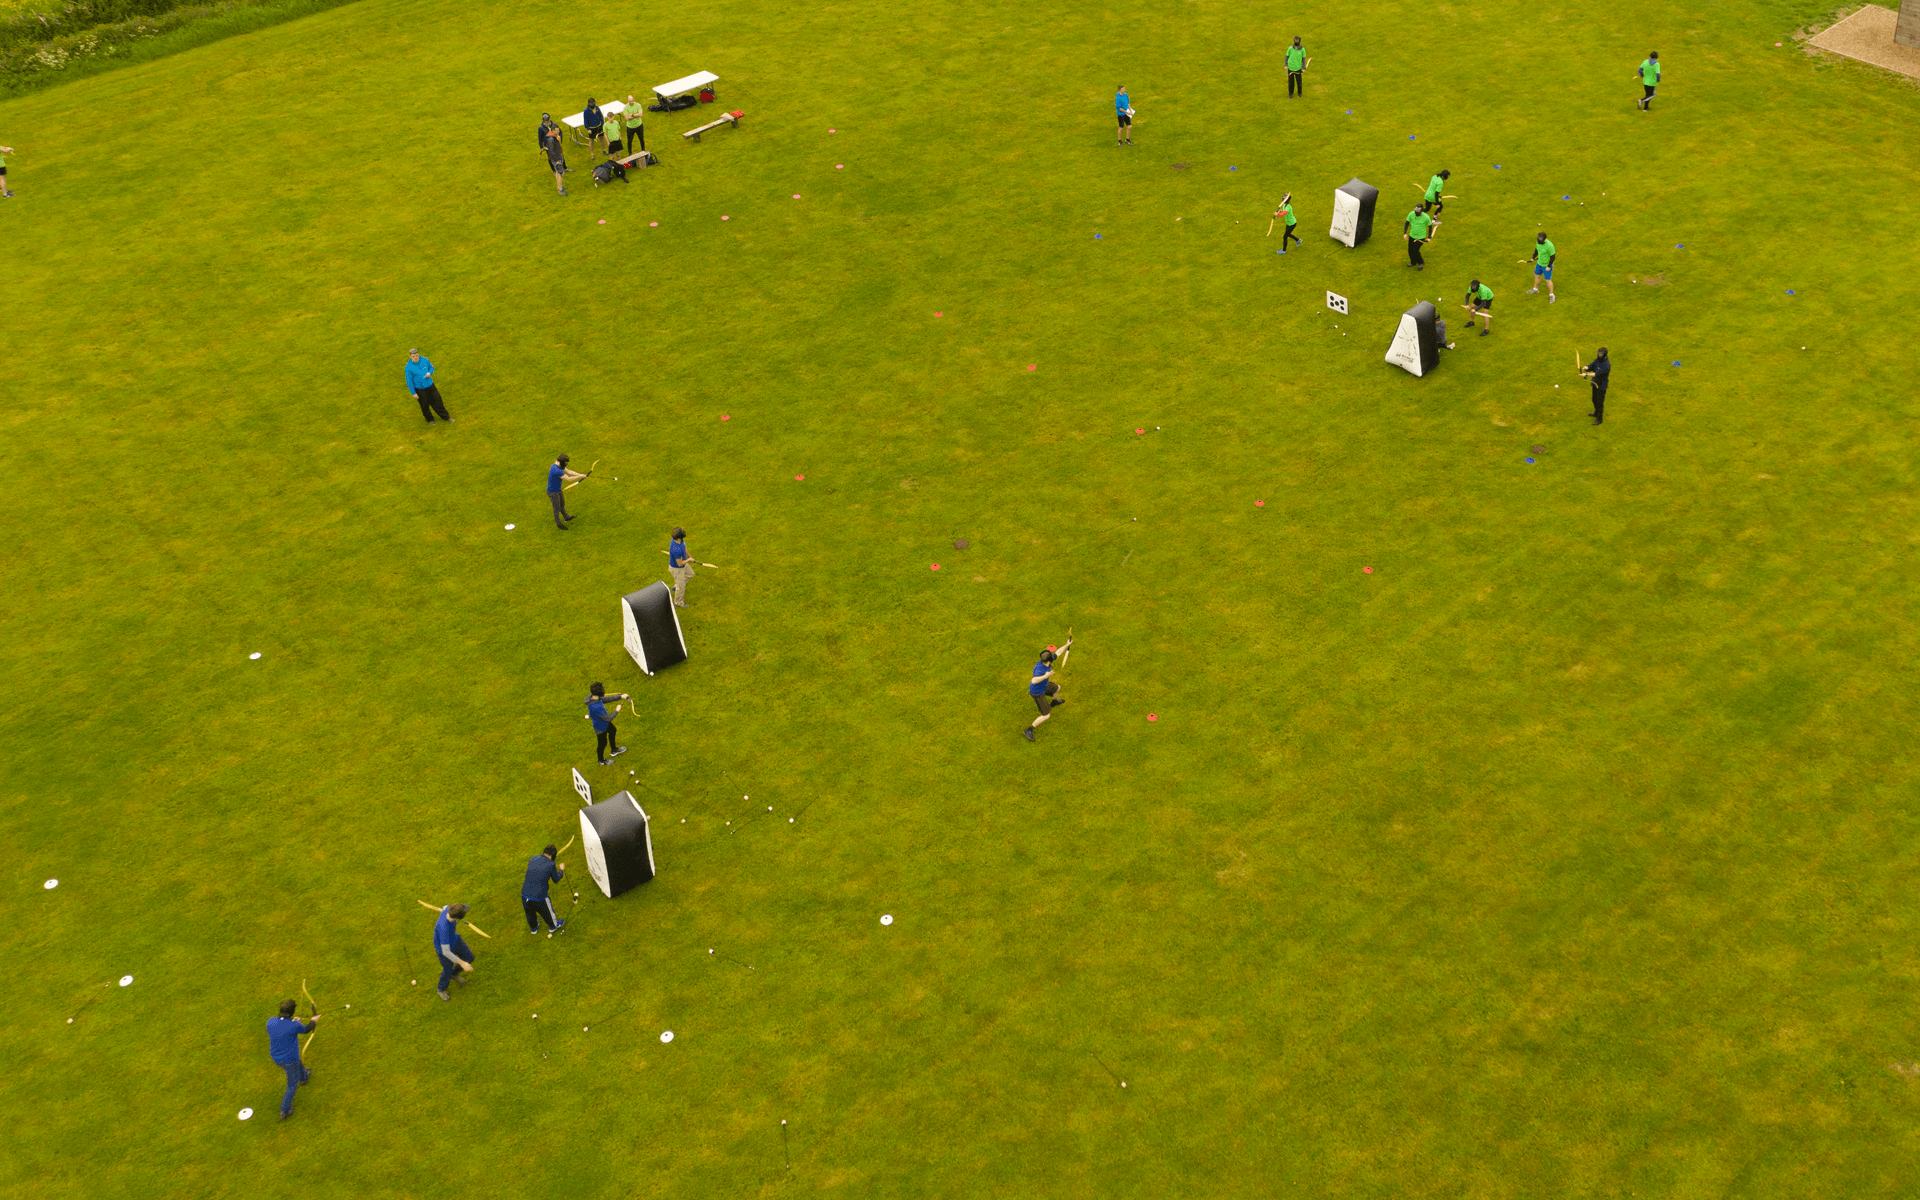 "Mavic 2 Pro" aerial drone photo of "Hydrock" employees playing arrow tag at corporate event in almondsbury bristol